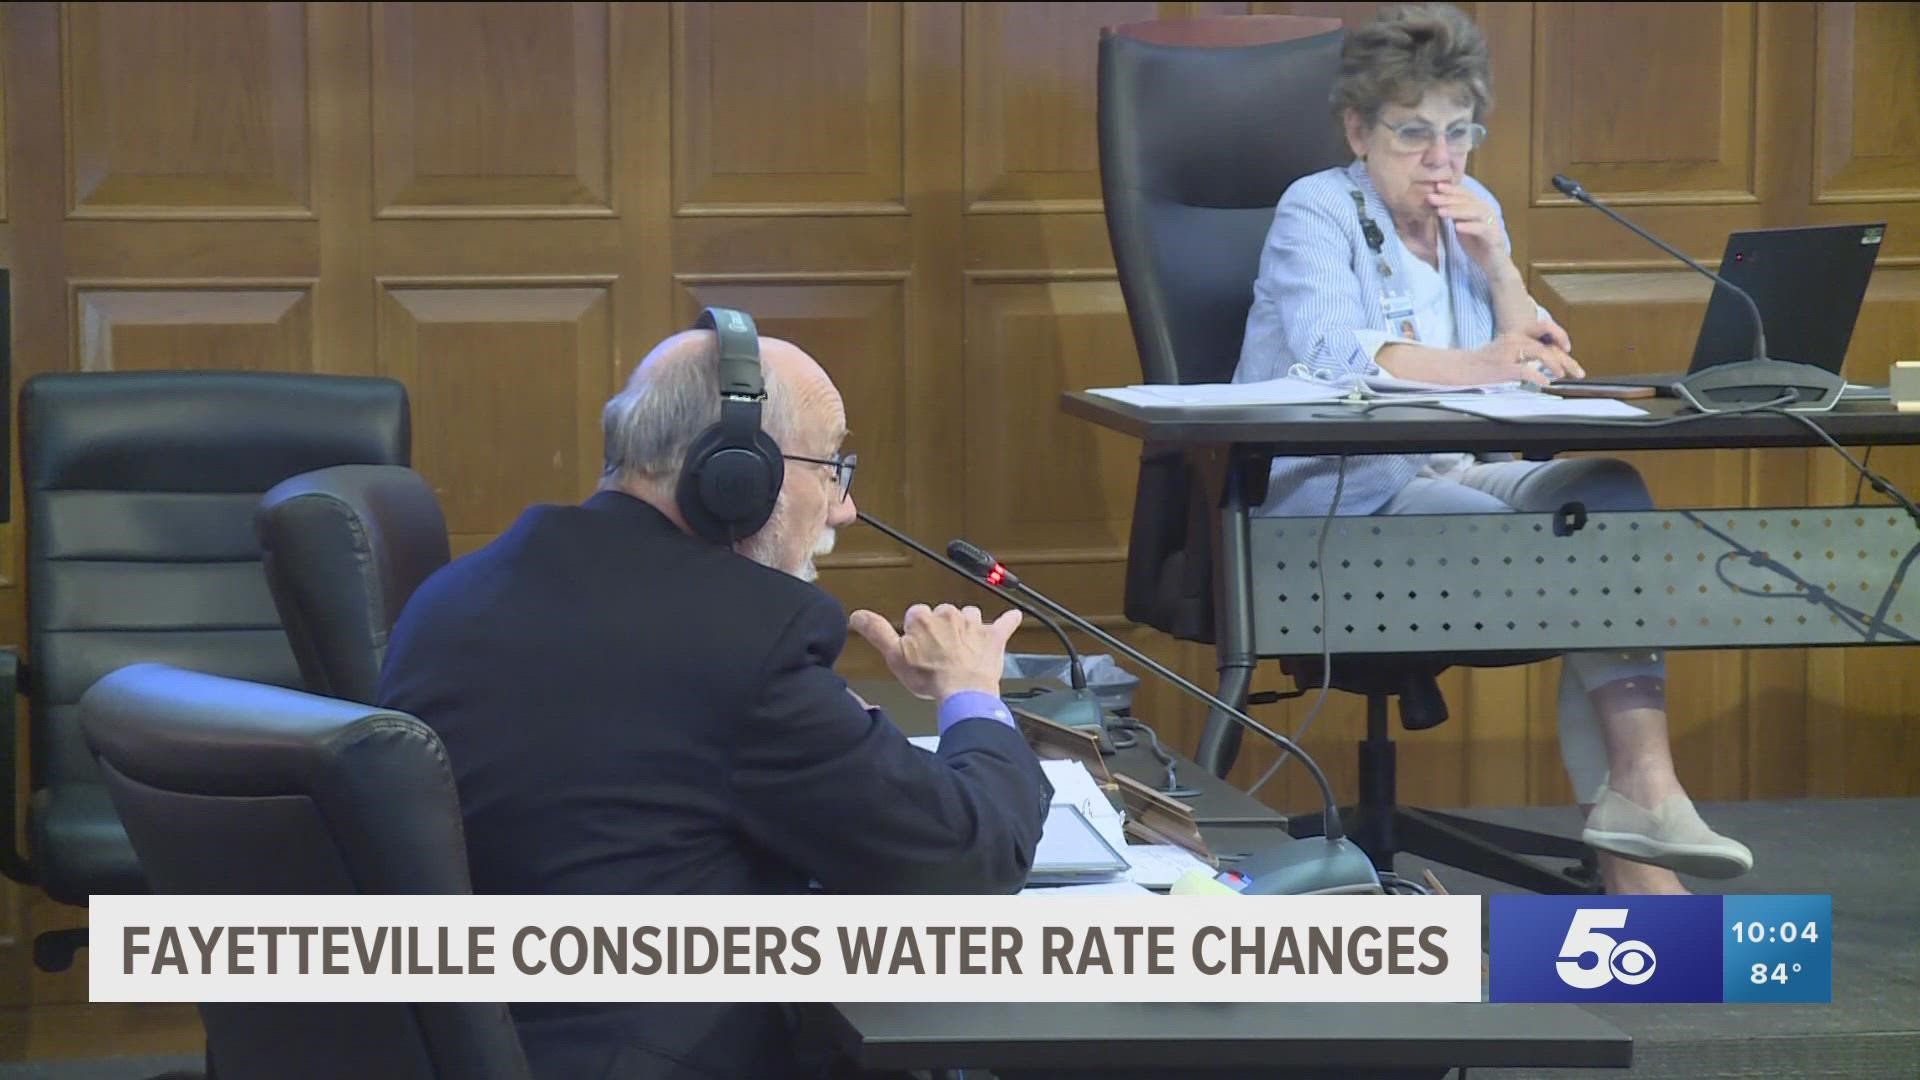 At the Tuesday night meeting, the Fayetteville City Council discussed possibly changing sewage and water rates for customers inside and outside city limits.